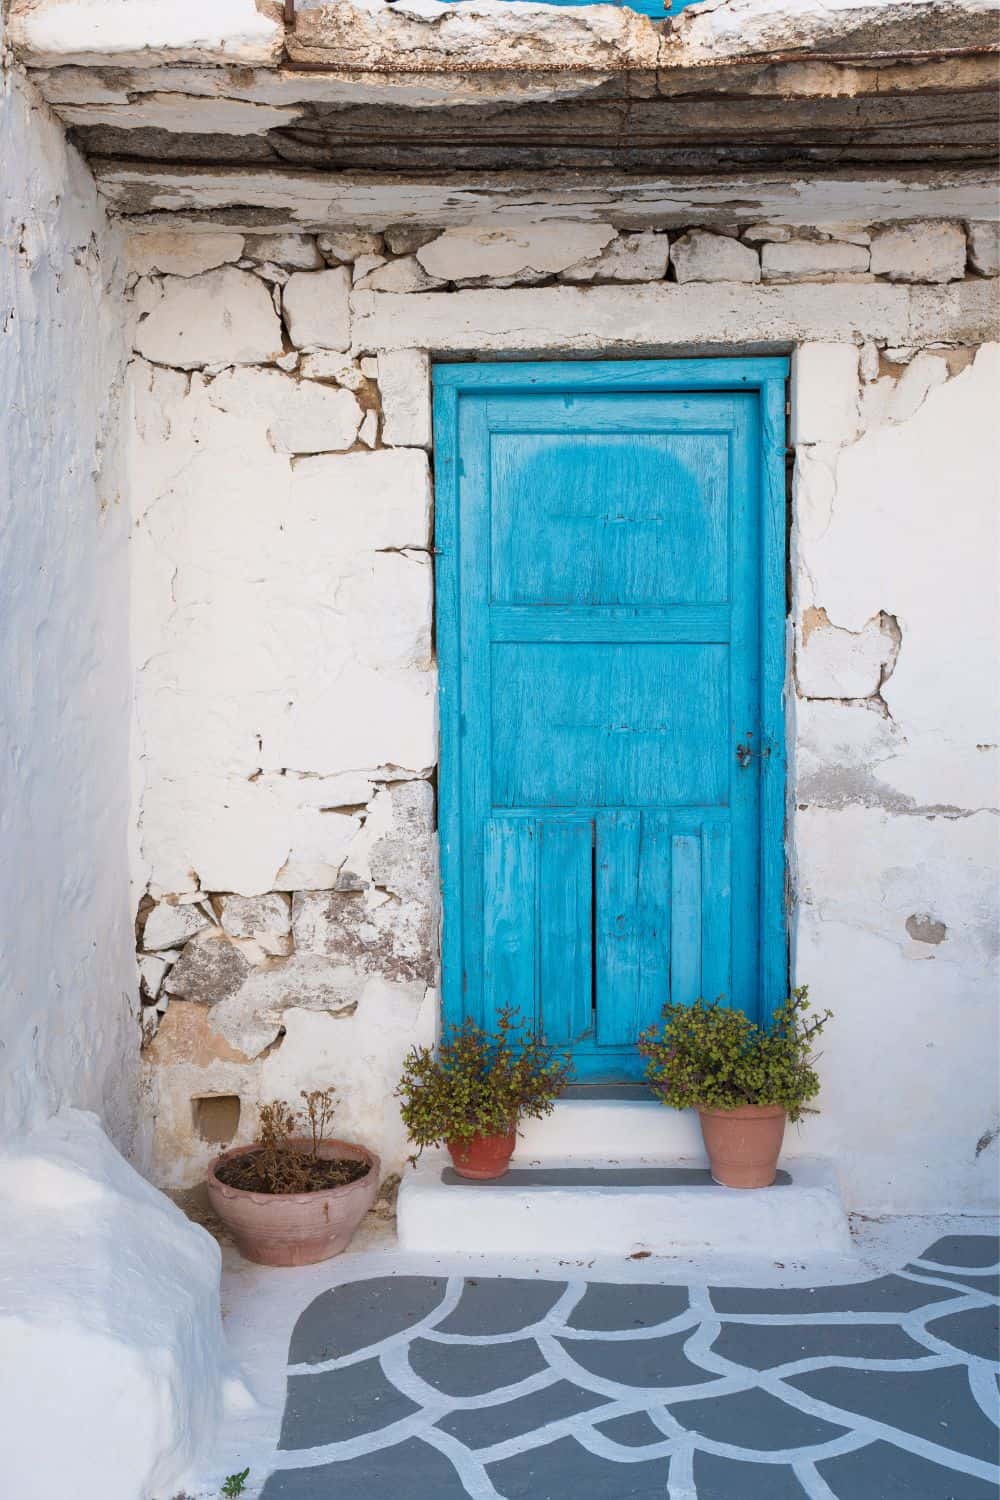 A textured image of a traditional Greek scene featuring a bright blue door set into a white-washed wall with peeling plaster. Potted plants sit on either side of the door, and the ground in front features a classic Greek design in grey and white. This image captures the charming architectural details found in Milos.